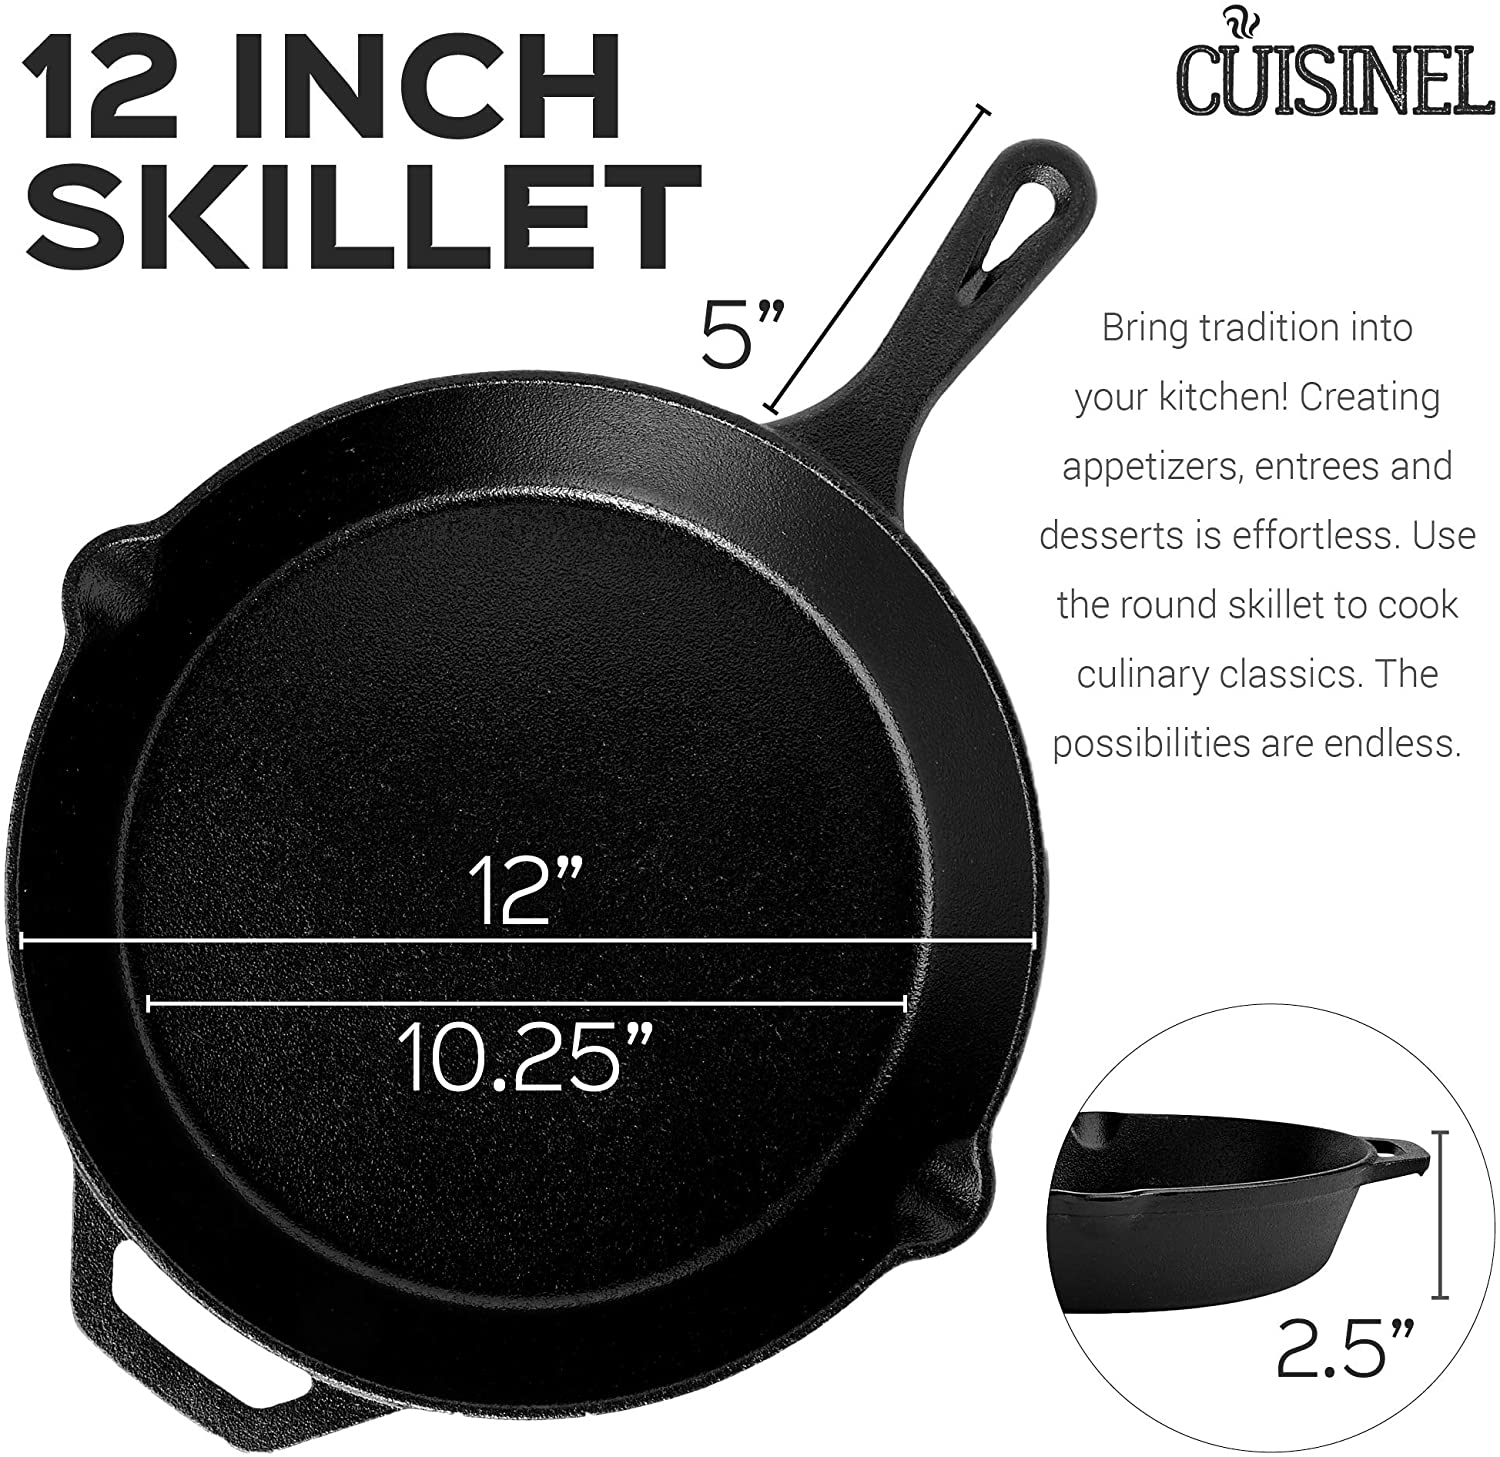 Cuisinel 12 inch Pre Seasoned Cast Iron Skillet Cookware with Lid & Handle Cover, Black